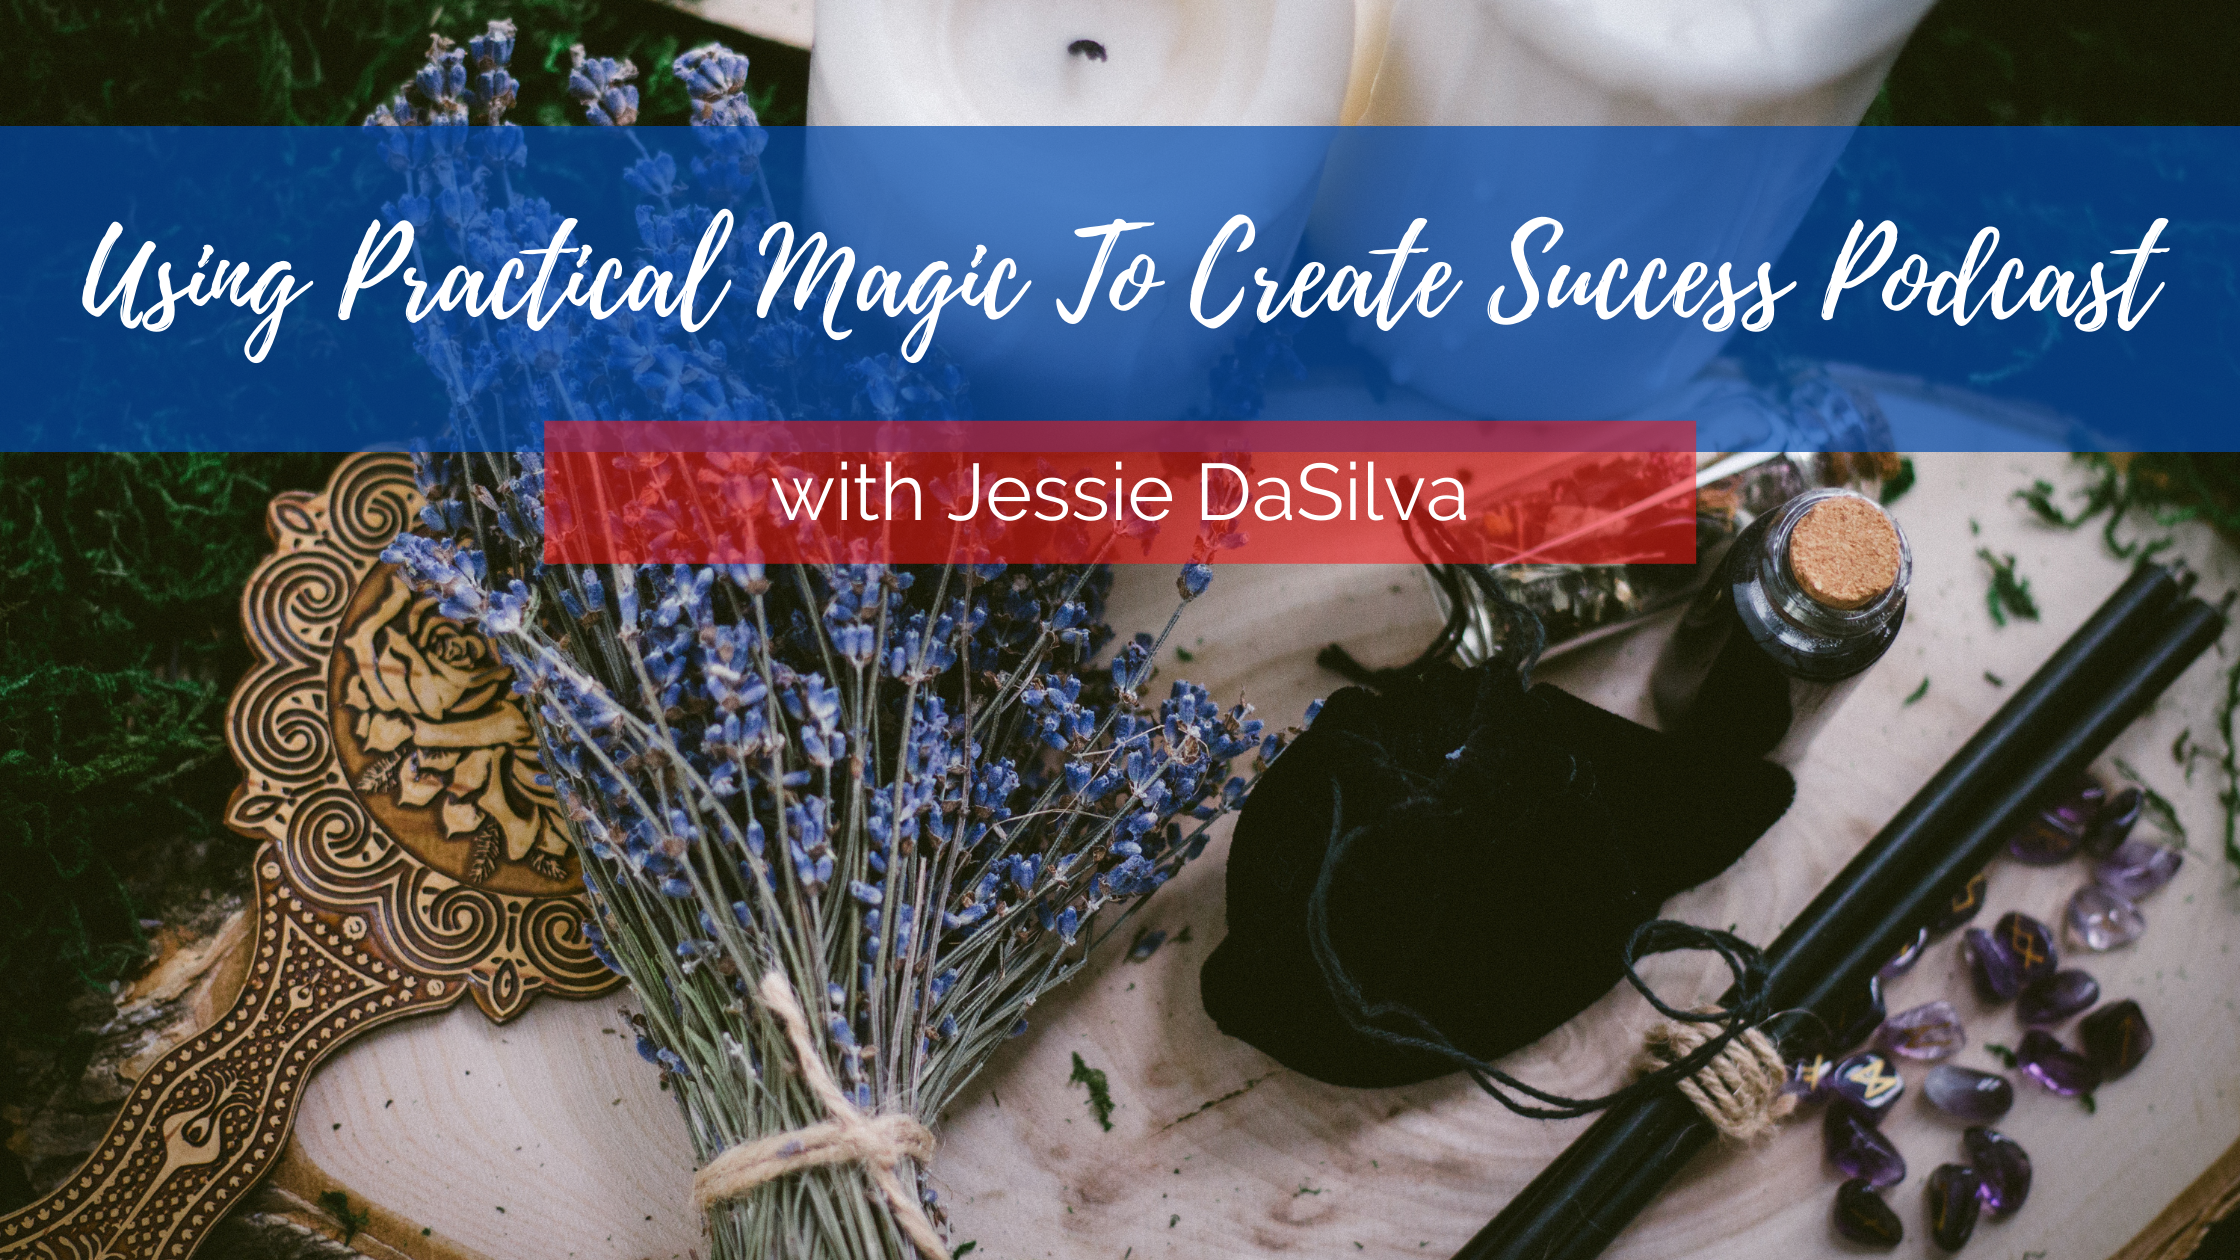 Picture of an altar with the words "Using Practical Magic To Create Success Podcast with Jessie DaSilva" over the picture.